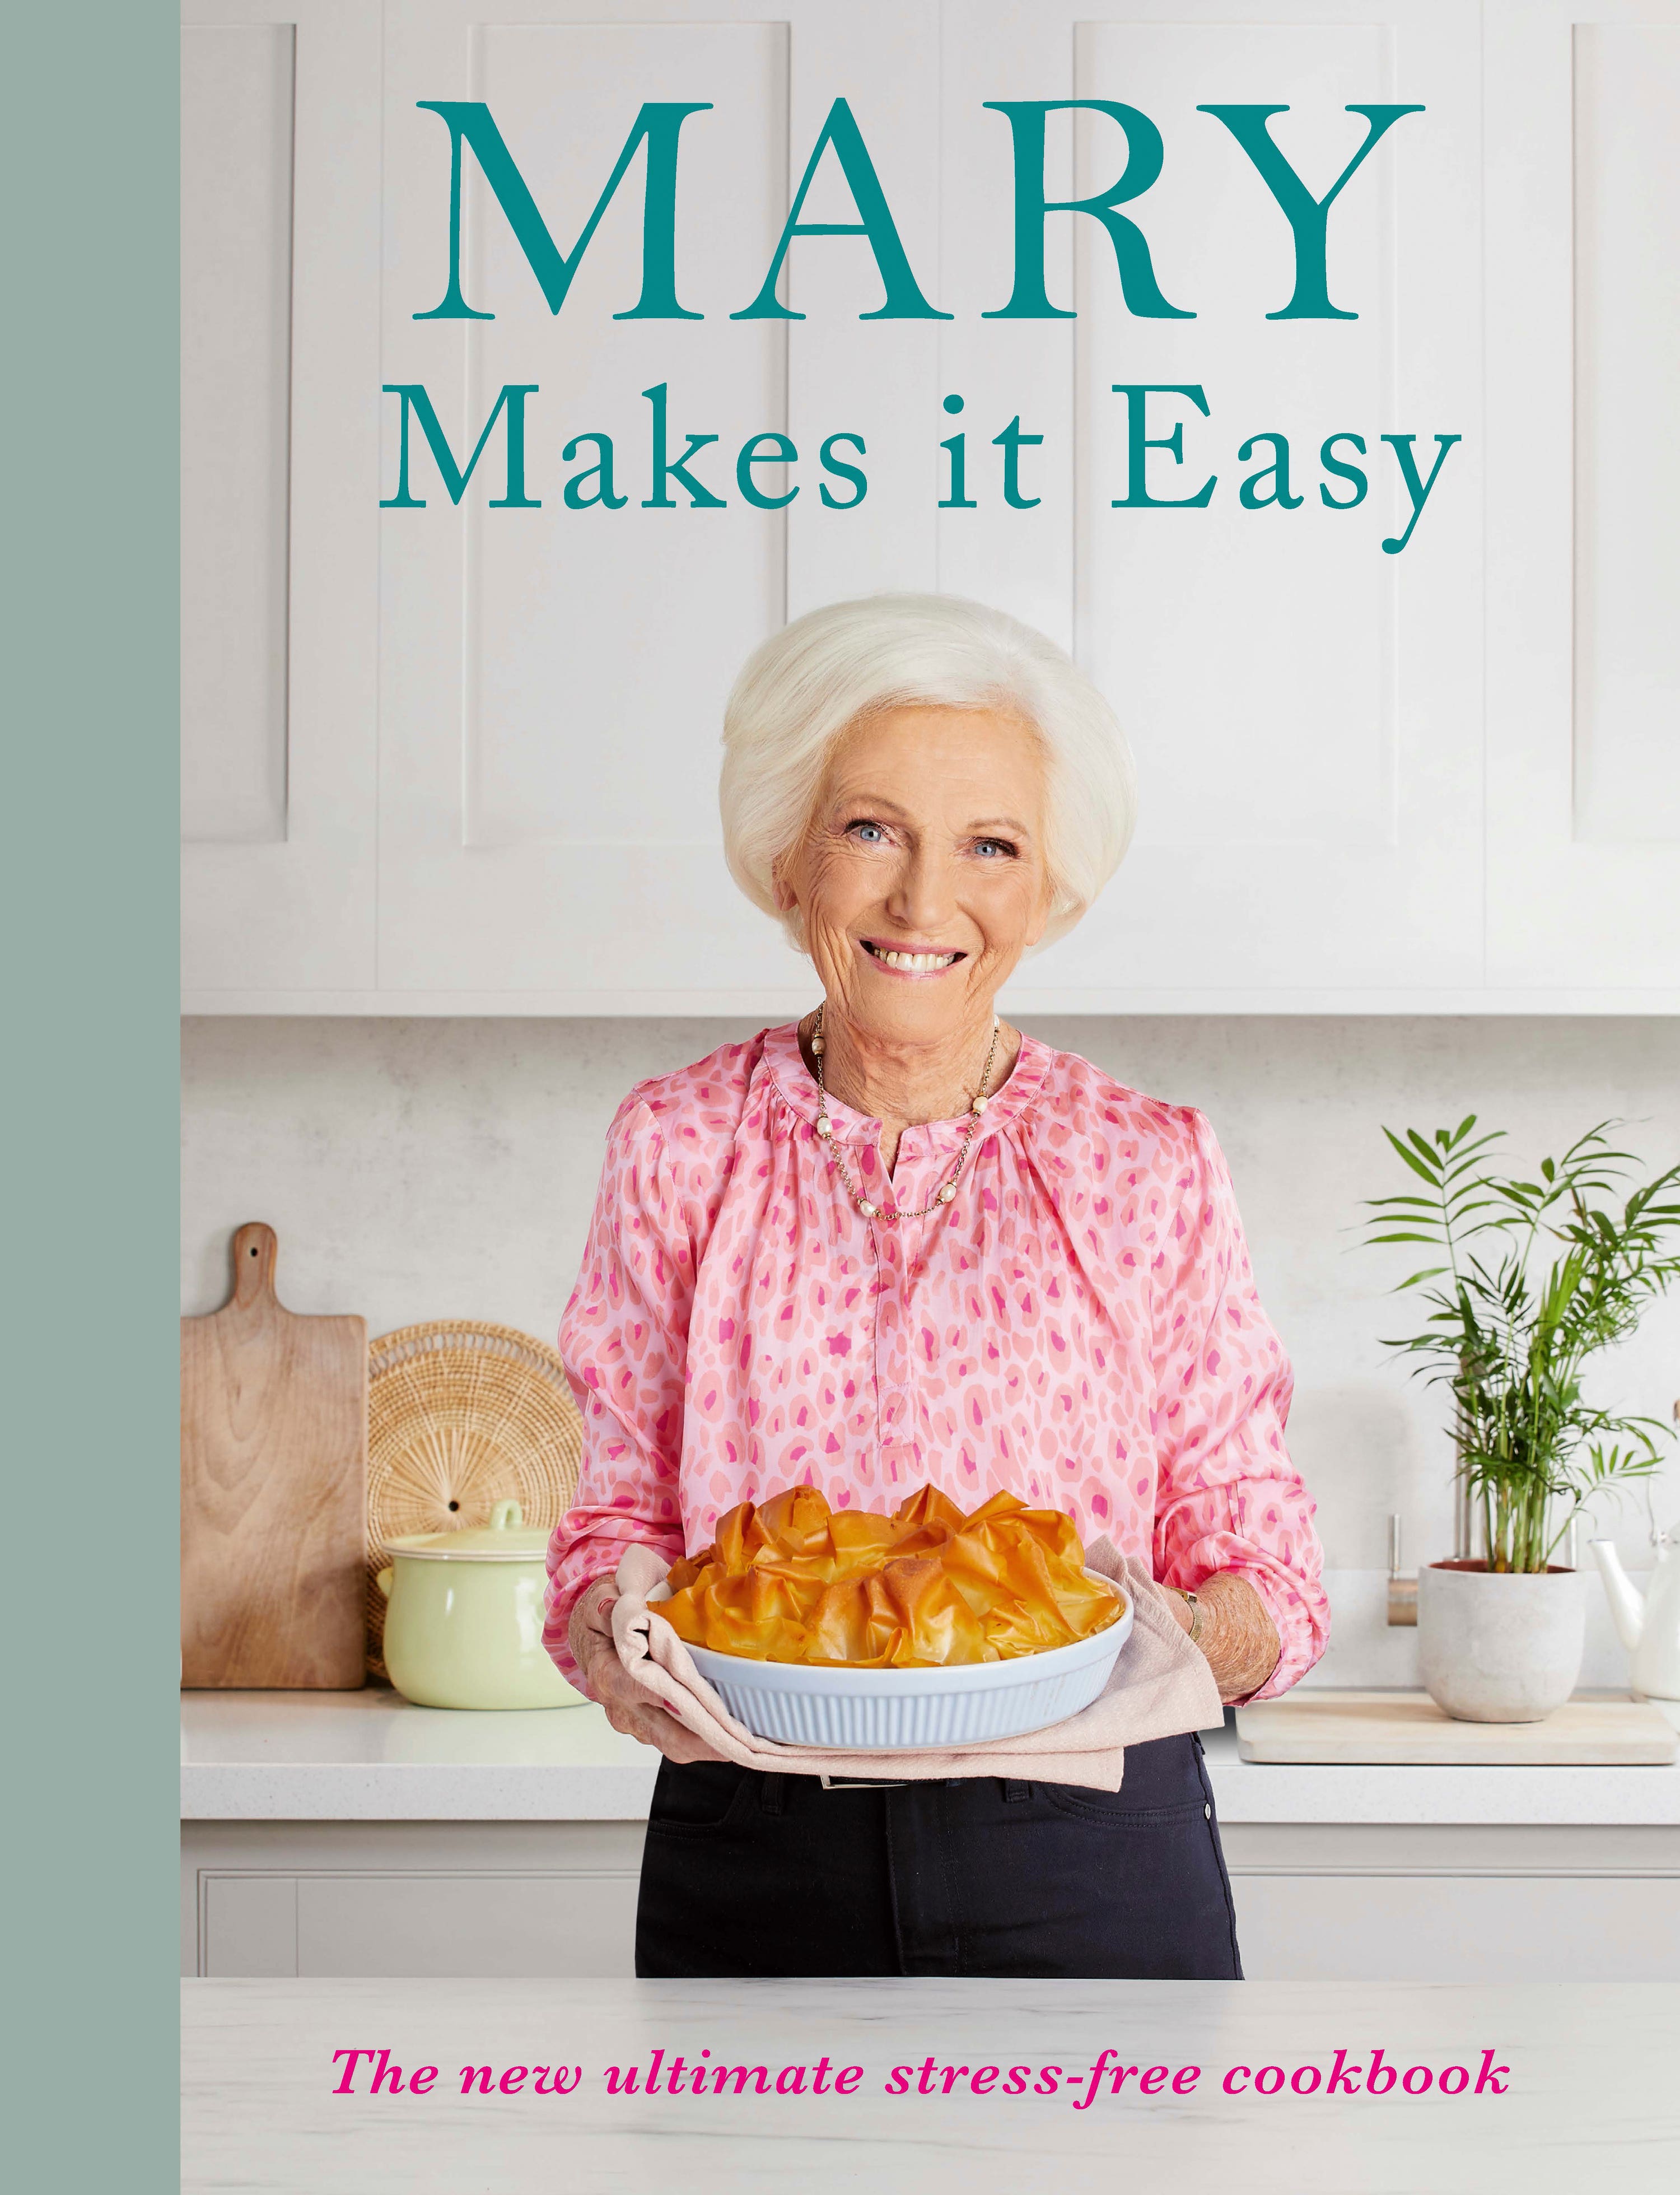 Mary Berry’s new book is all about keeping things simple